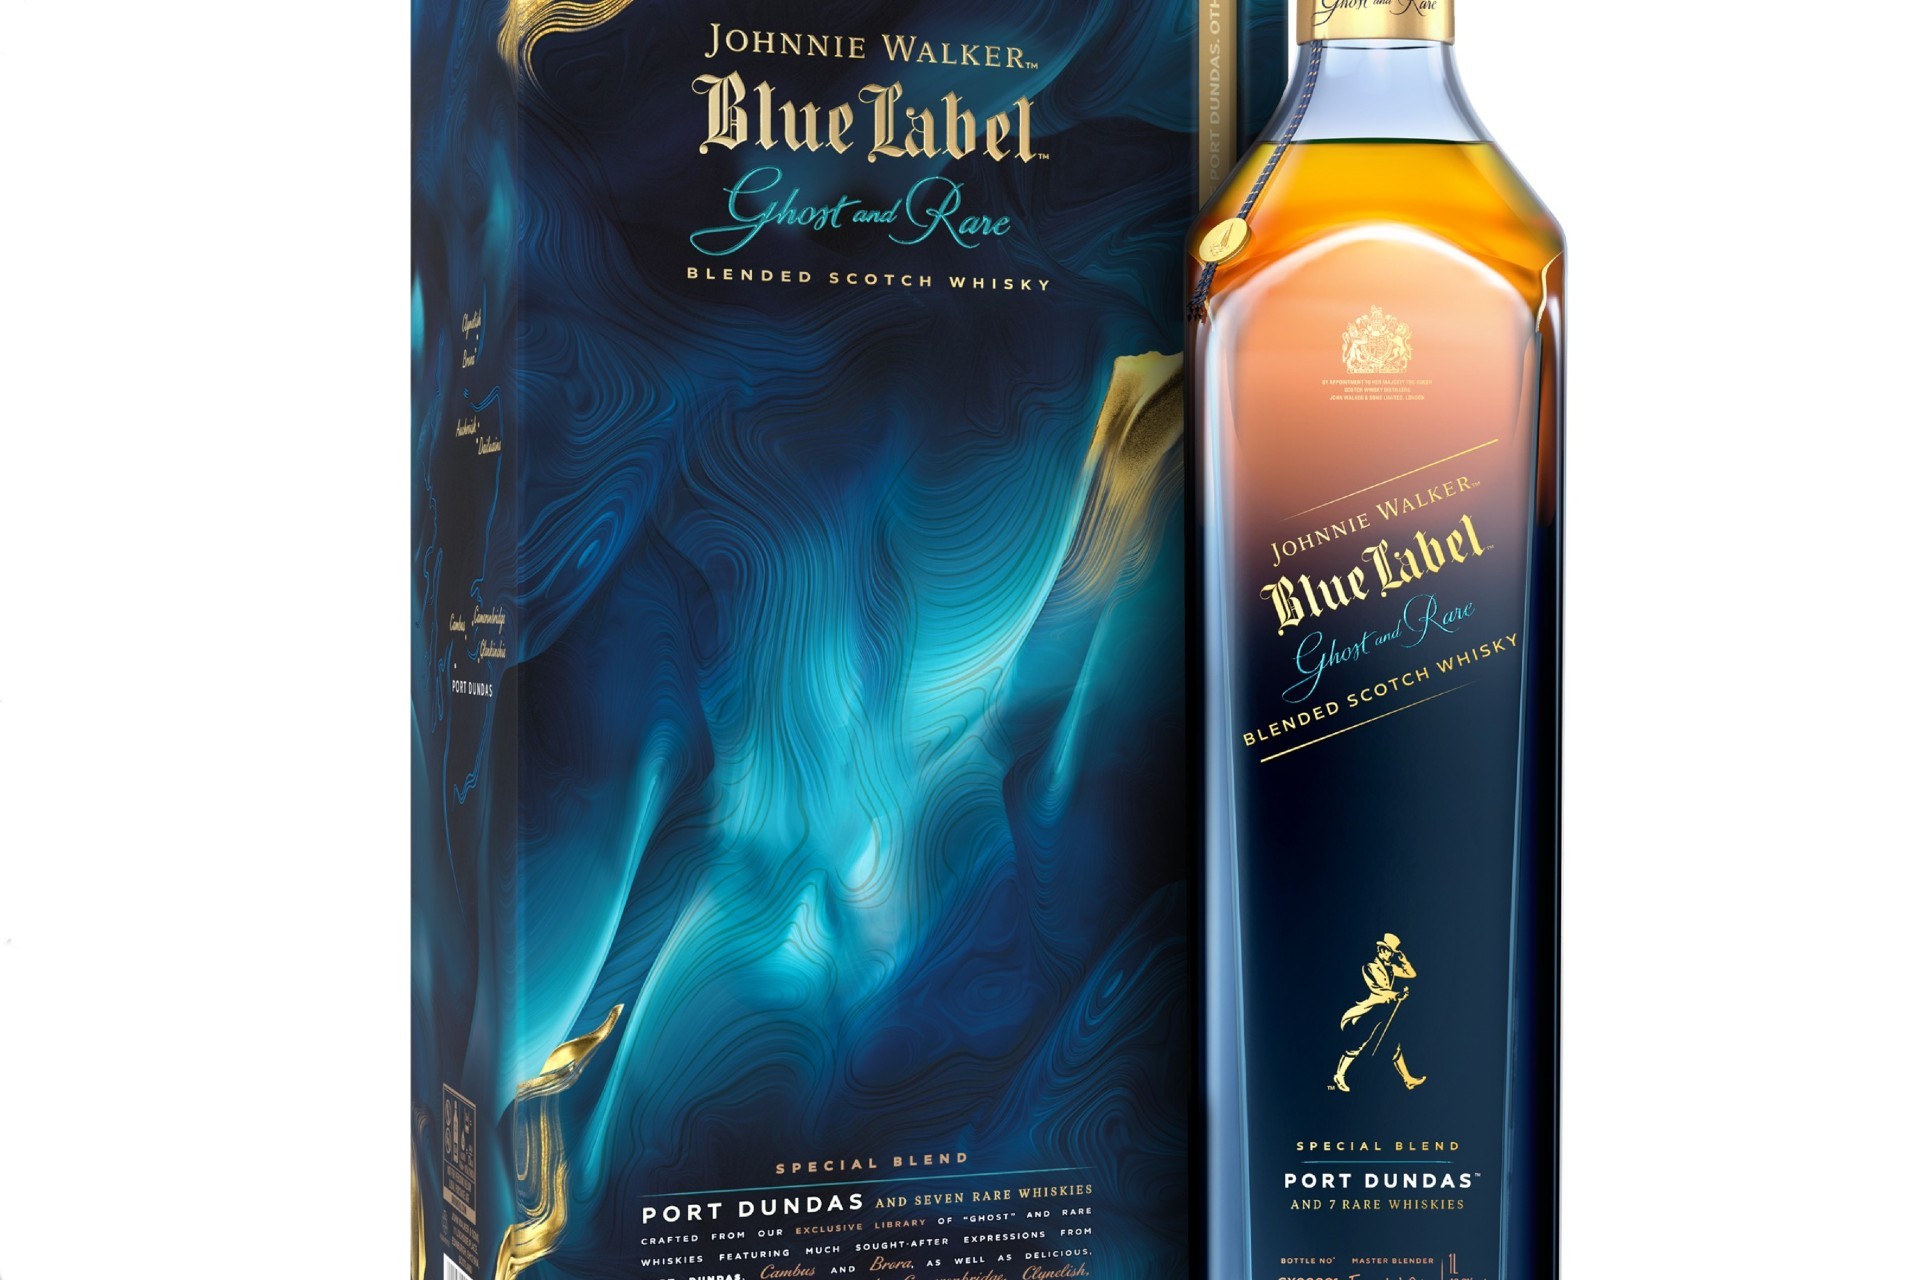 Johnnie Walker Blue Label Ghost and Rare Port Dundas Bottle with Pack